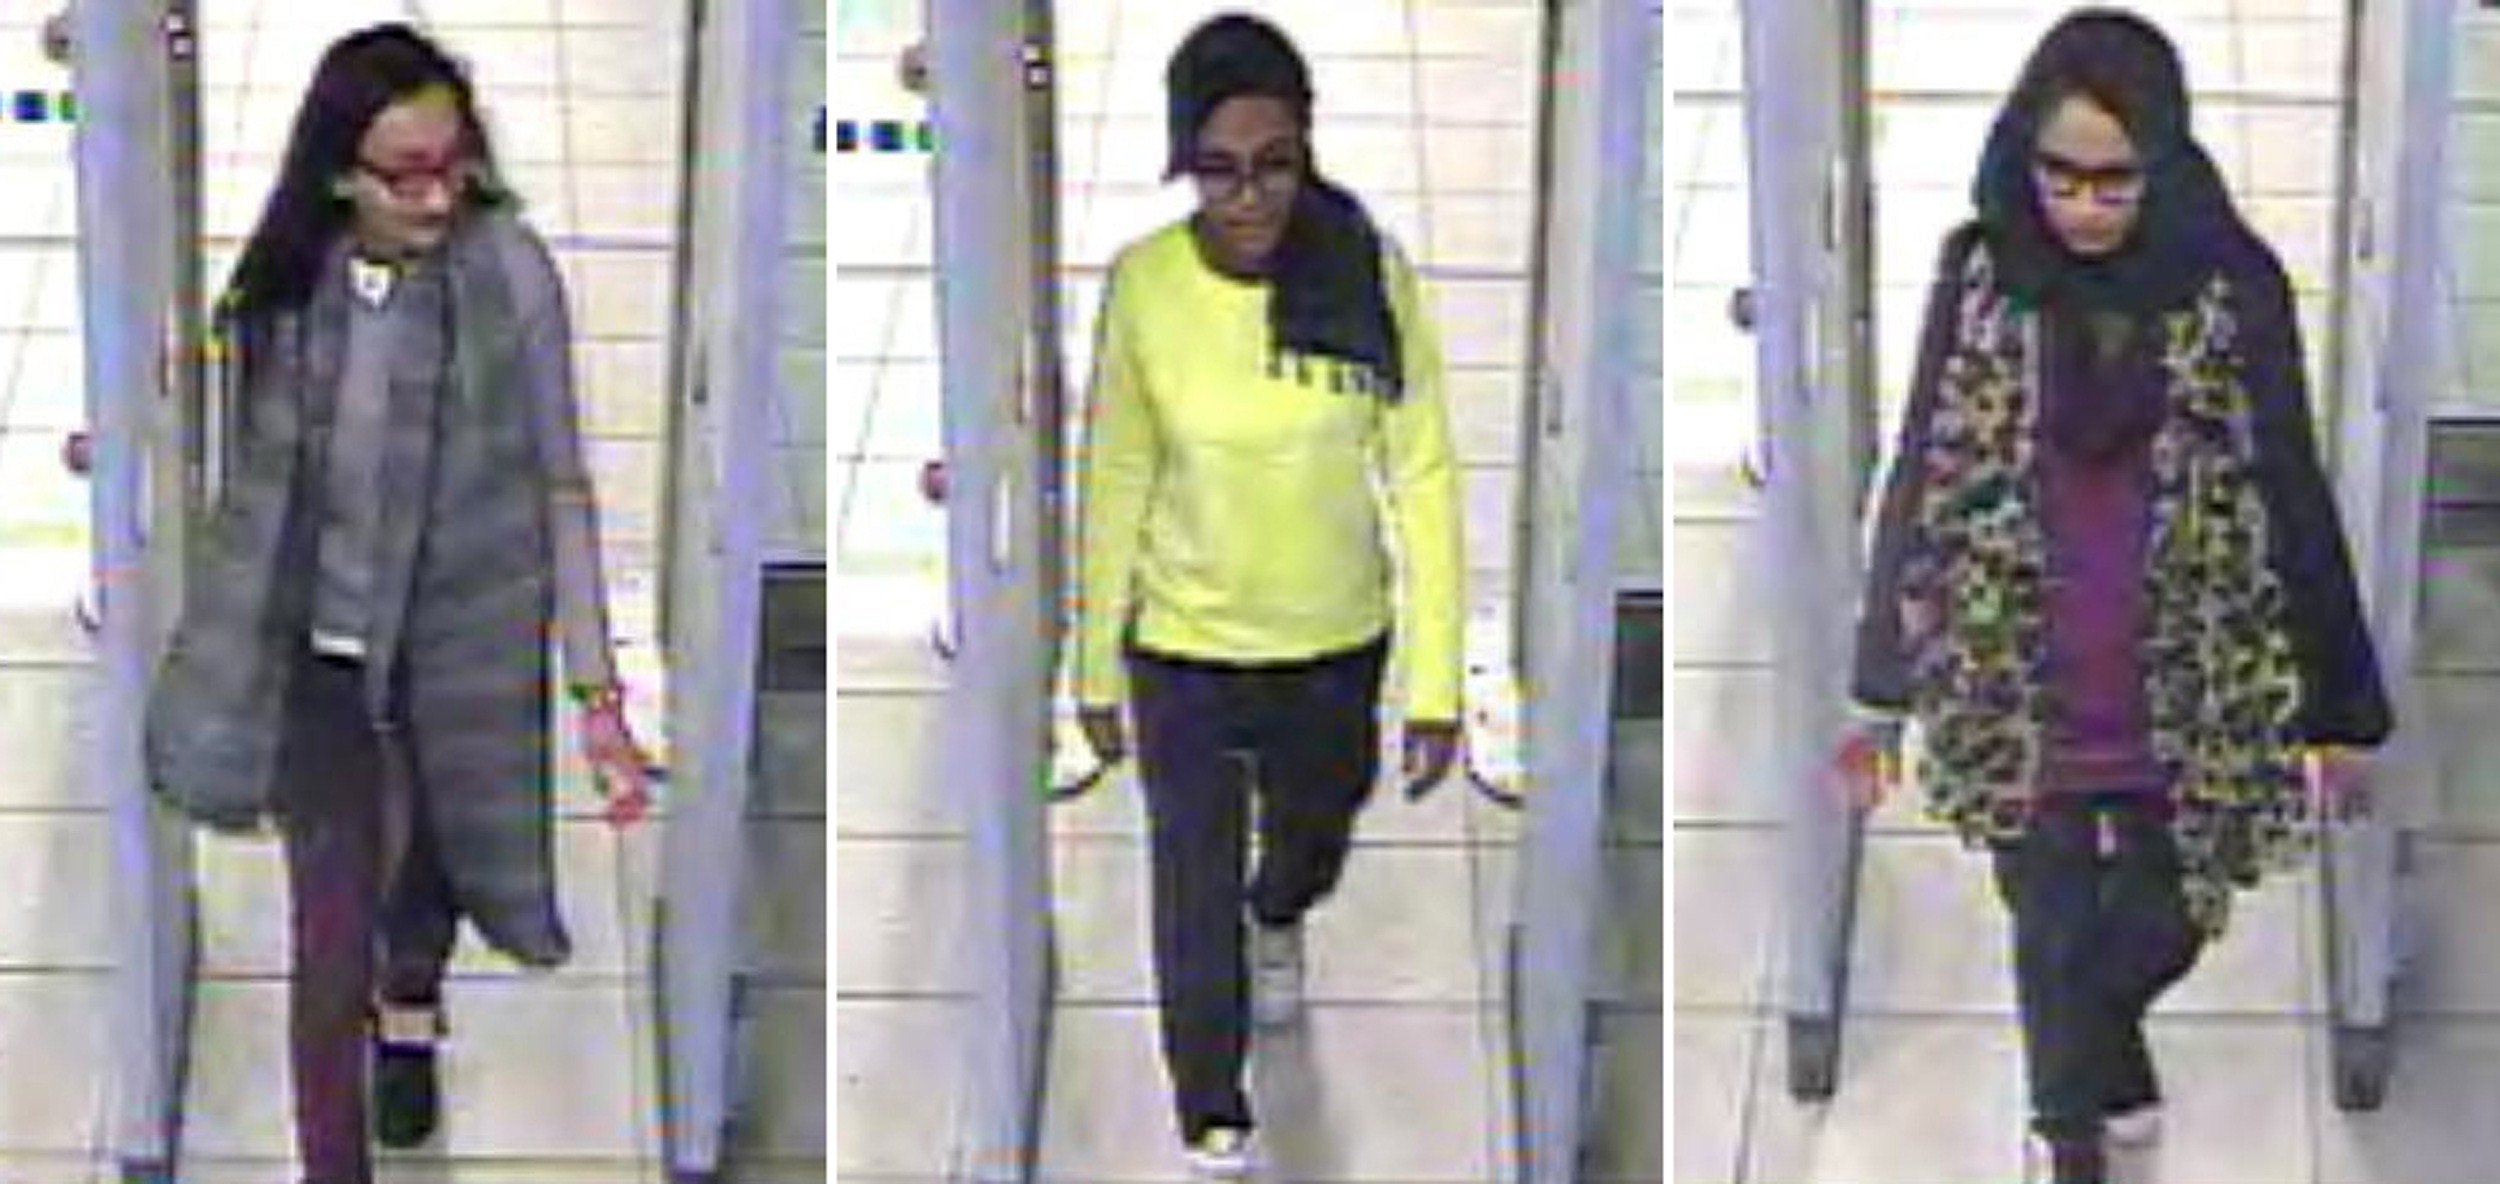 A combination of handout CCTV pictures received from the Metropolitan Police Service on Feb. 23, 2015, shows British teenagers Kadiza Sultana, Amira Abase and Shamima Begum passing through security barriers at Gatwick Airport, London, on Feb. 17, 2015 (AFP/Getty Images)